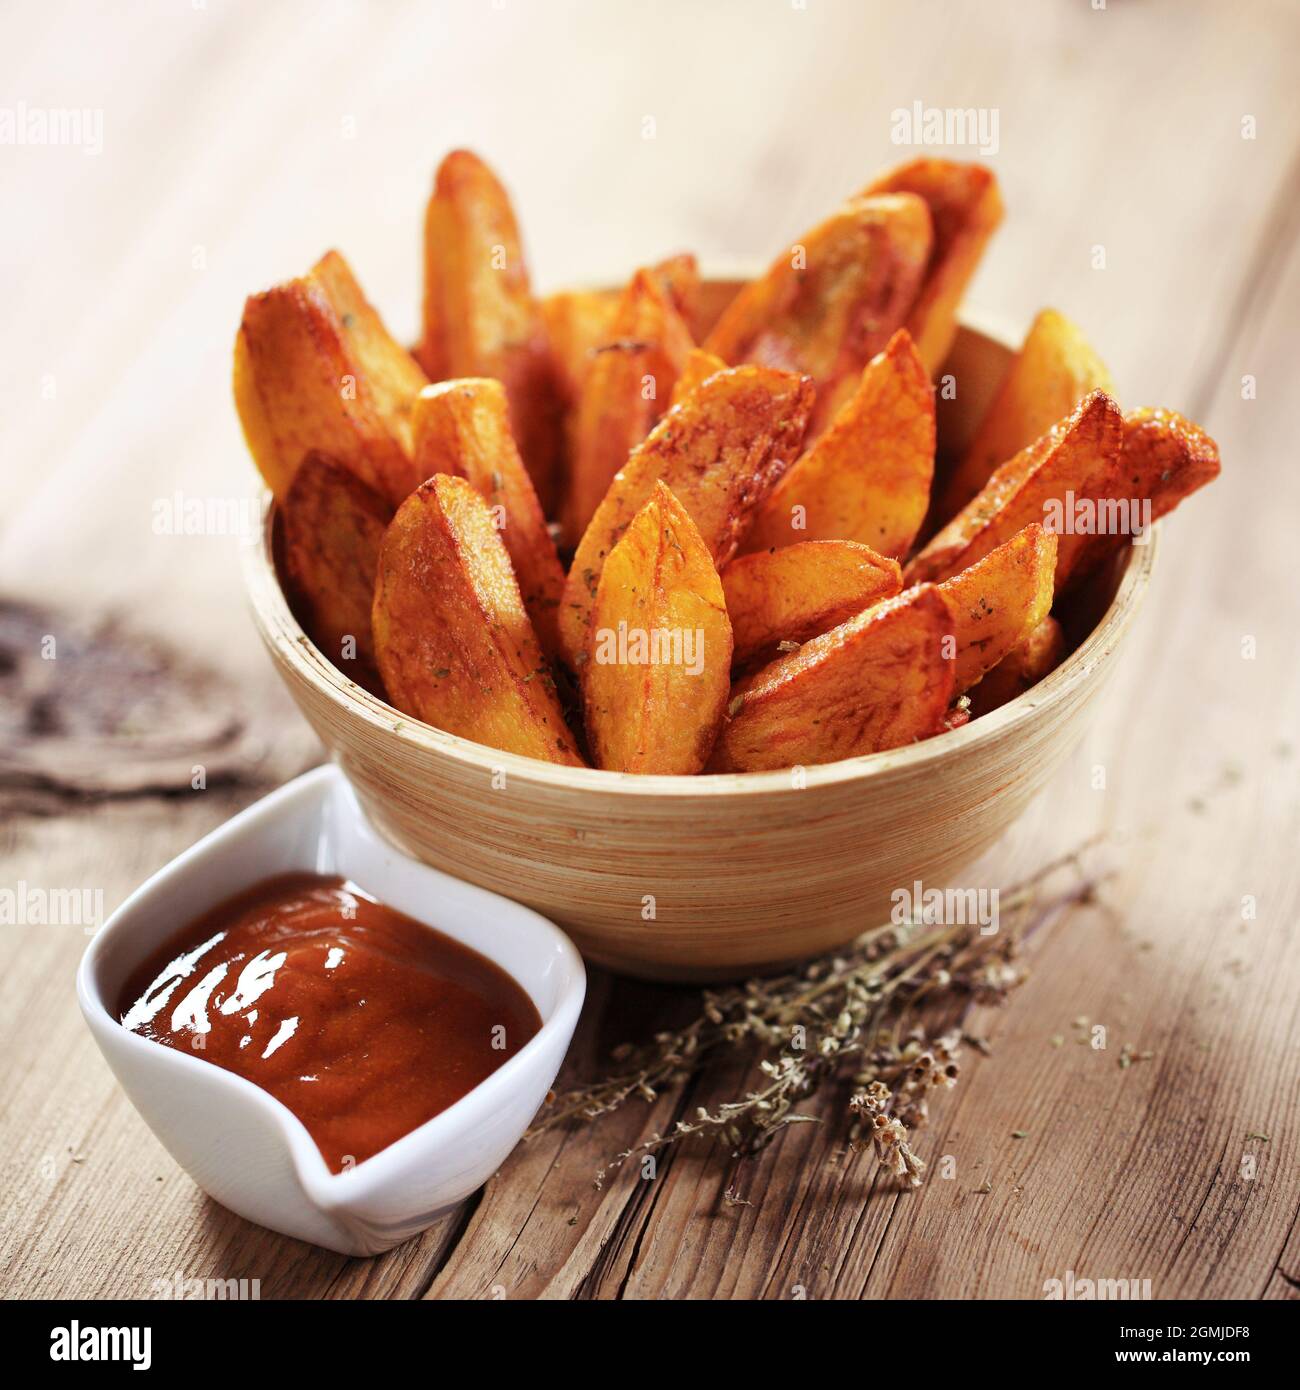 french fries on wodden background Stock Photo